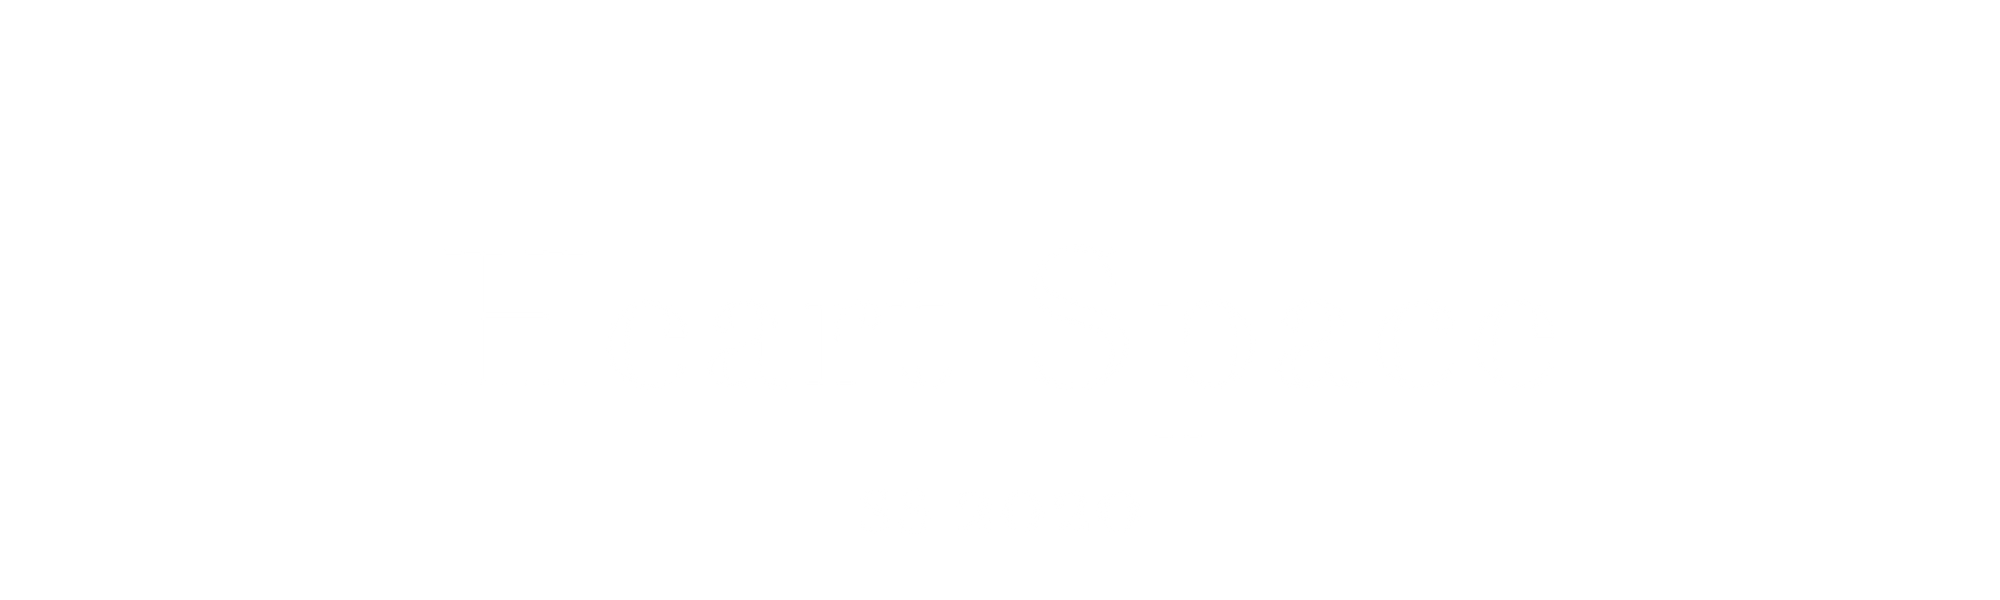 Heart Space 1